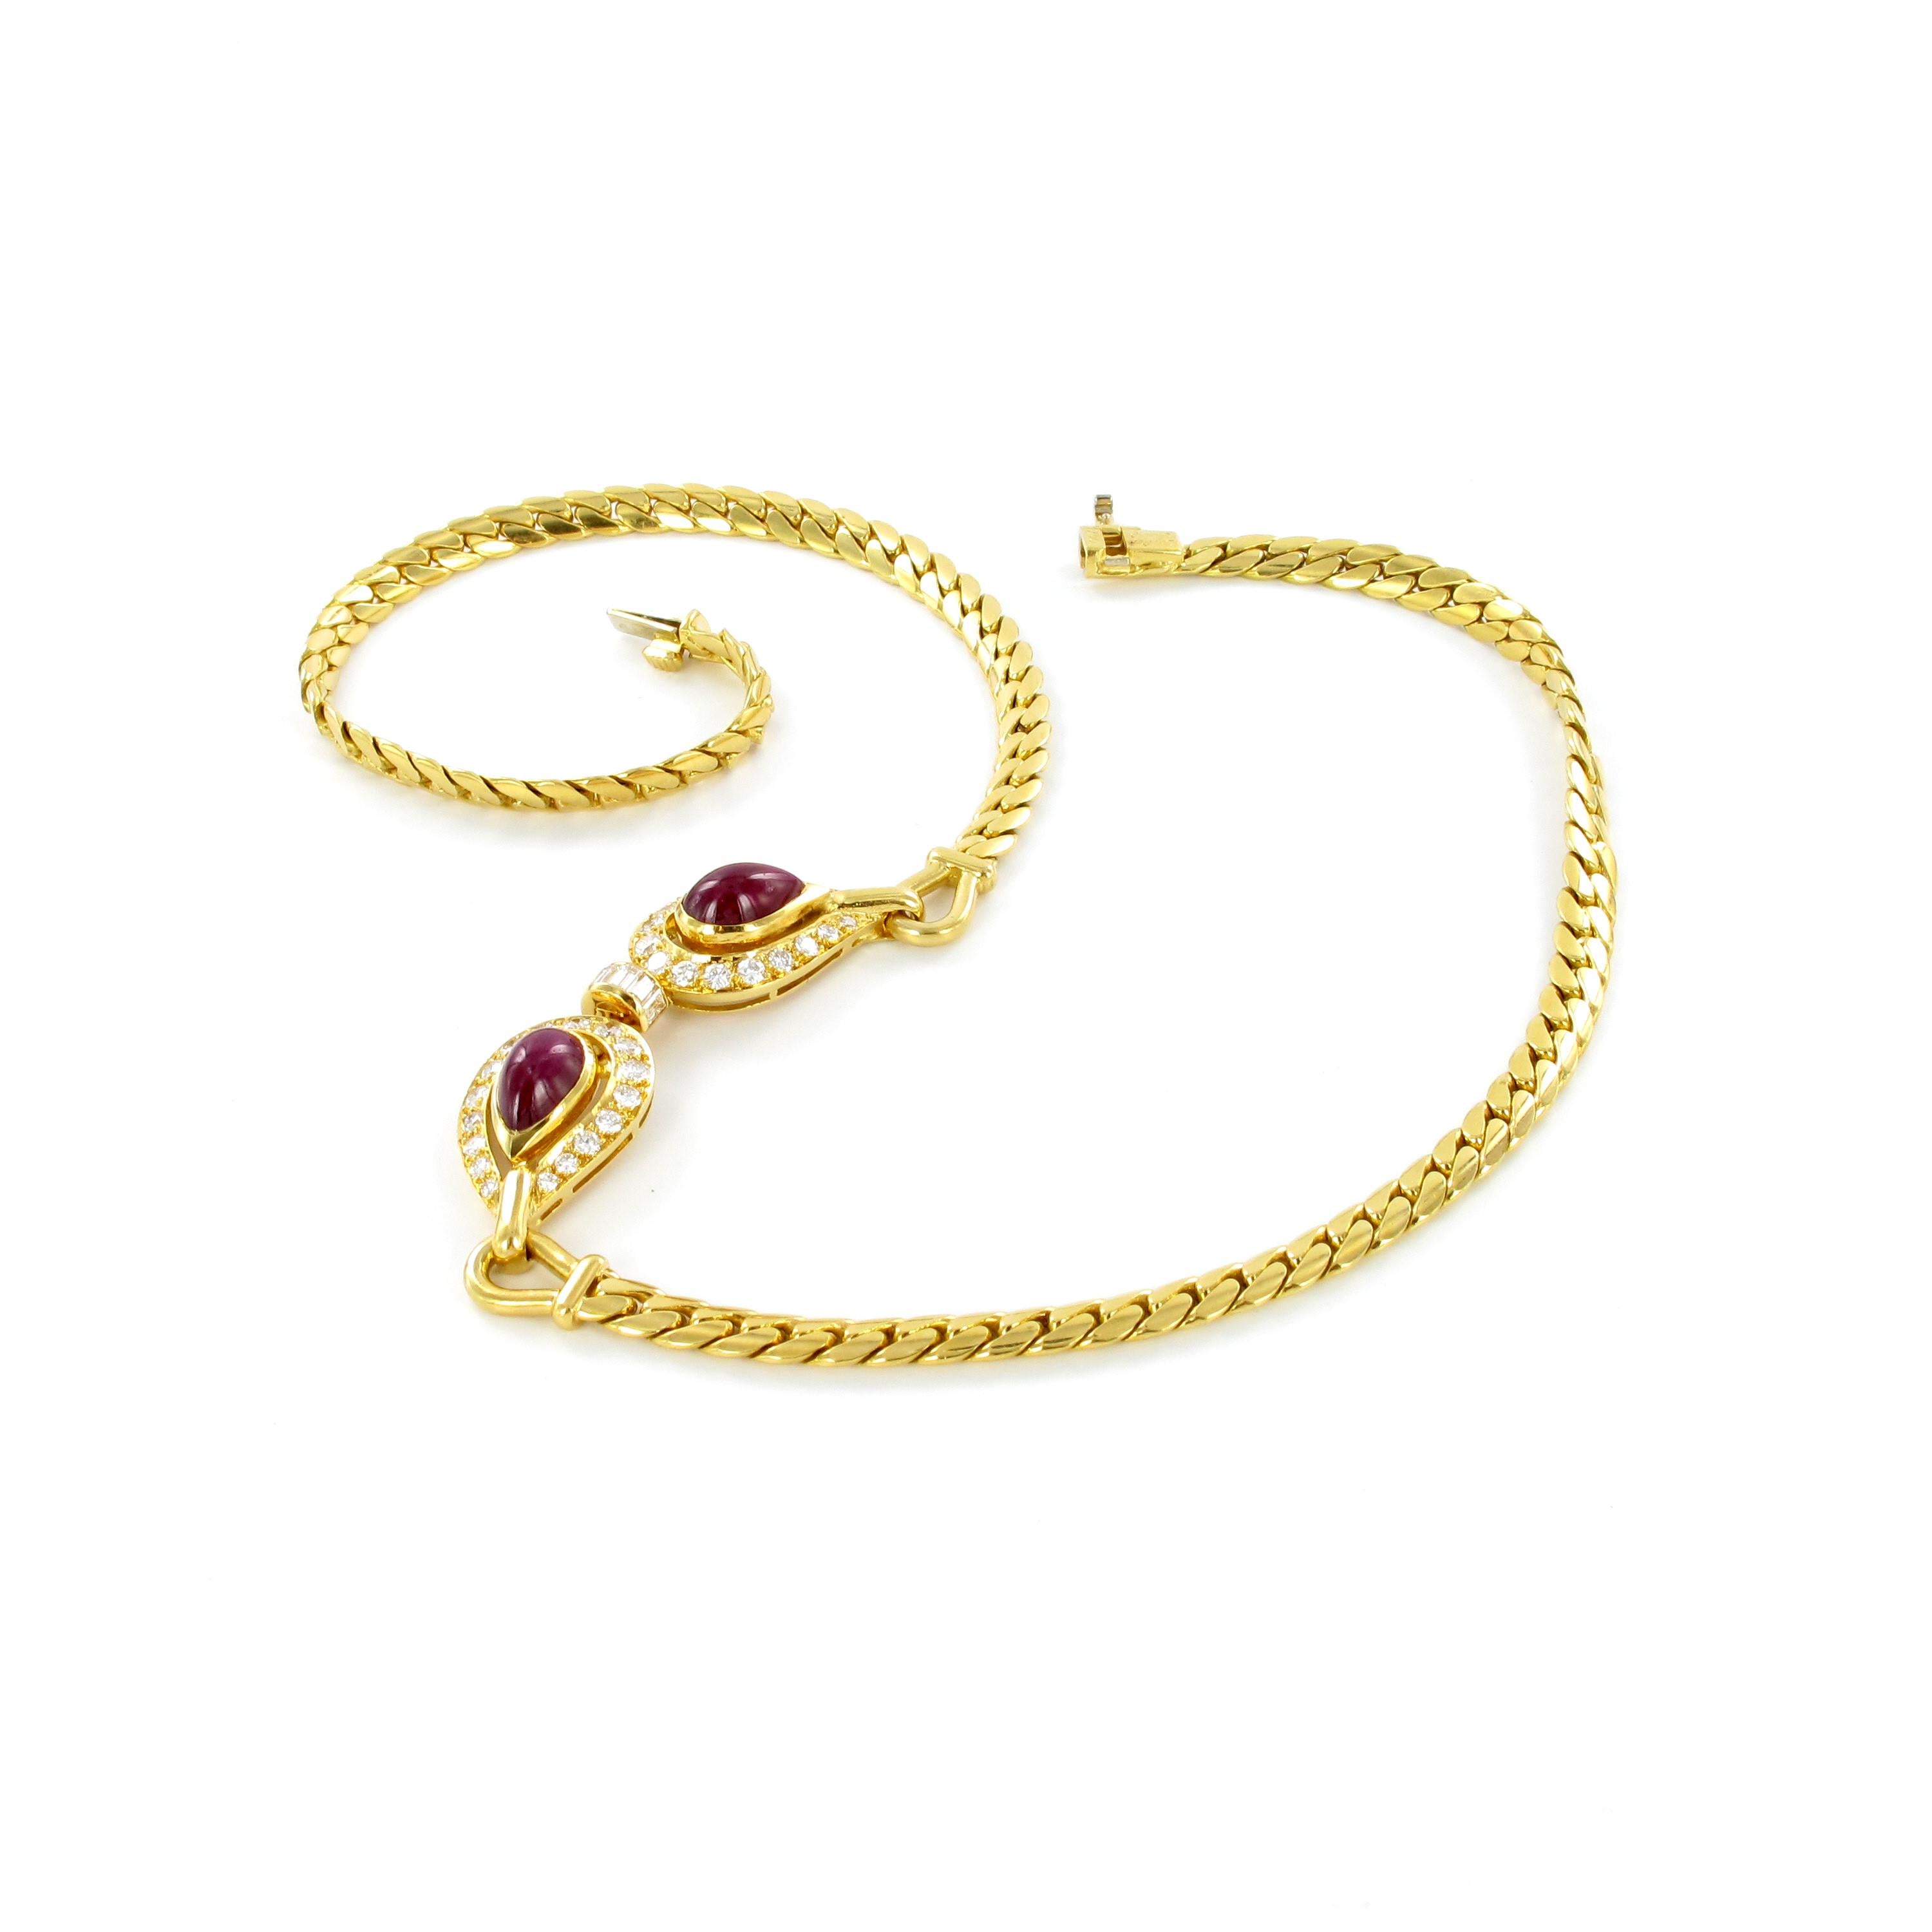 Cabochon Cartier Paris Ruby and Diamond Necklace in 18 Karat Yellow Gold